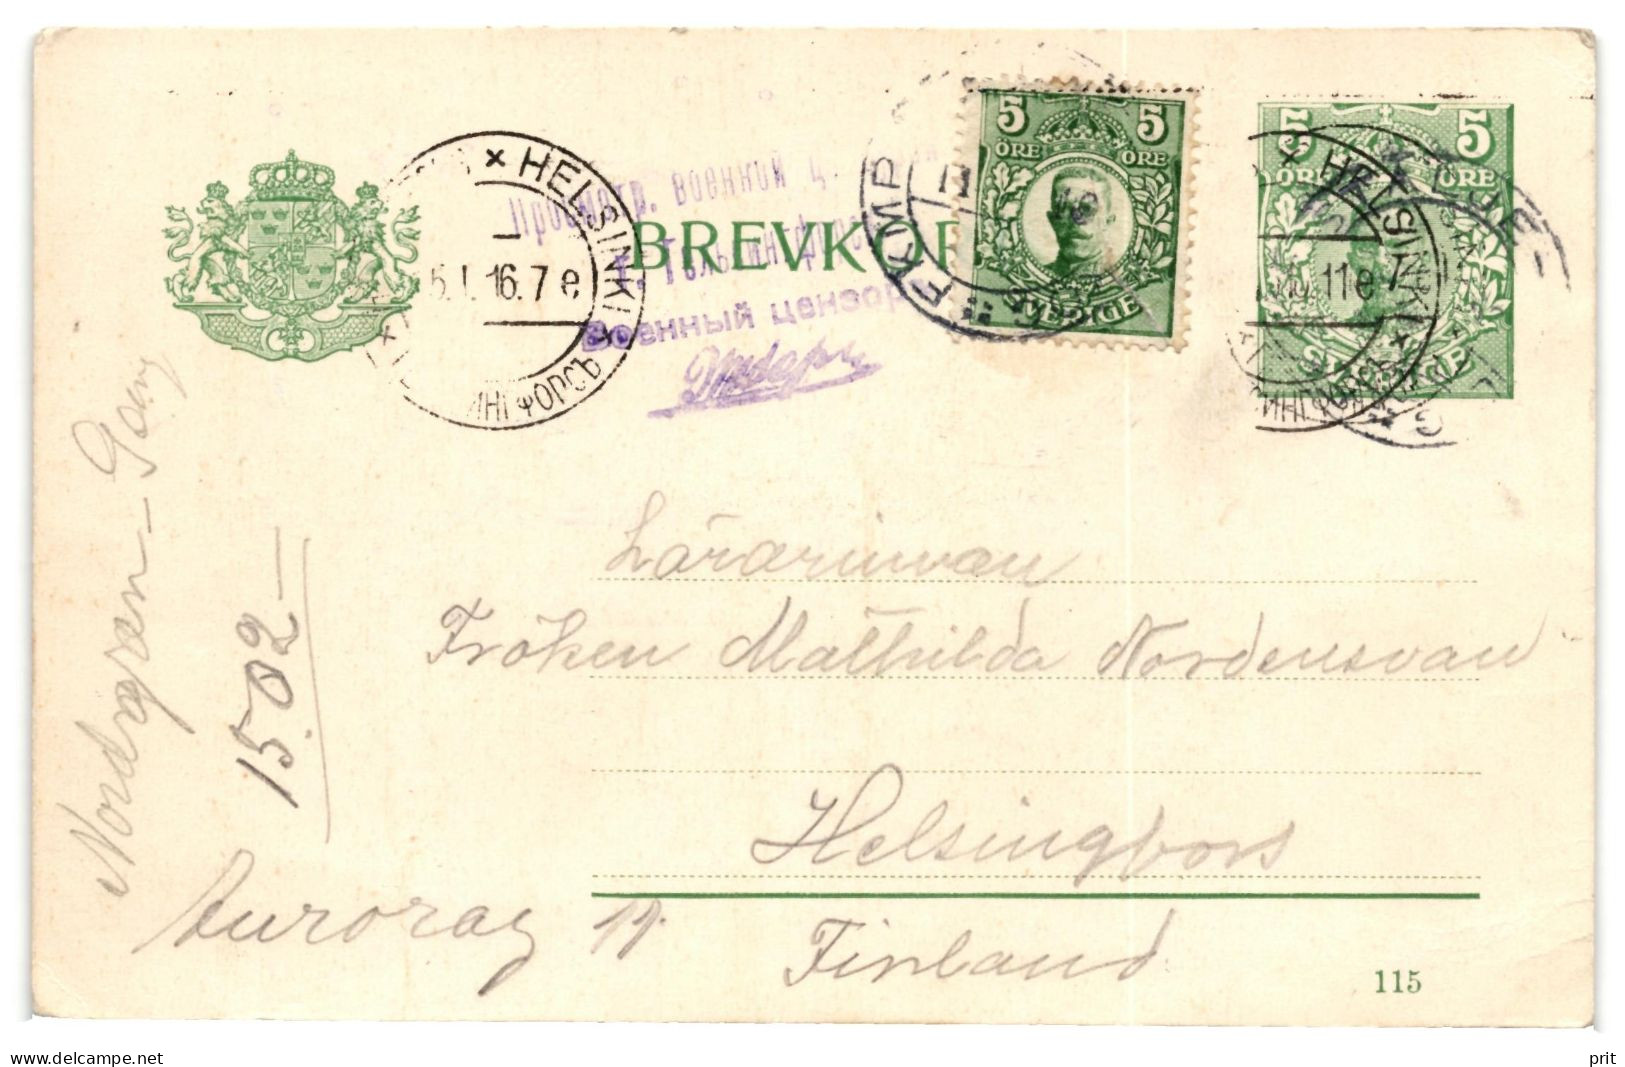 Helsinki Helsingfors WW1 Rare Finland Russian Government Military Censor Cancel 1917 On Swedish Postal Stationery Card - Militaires